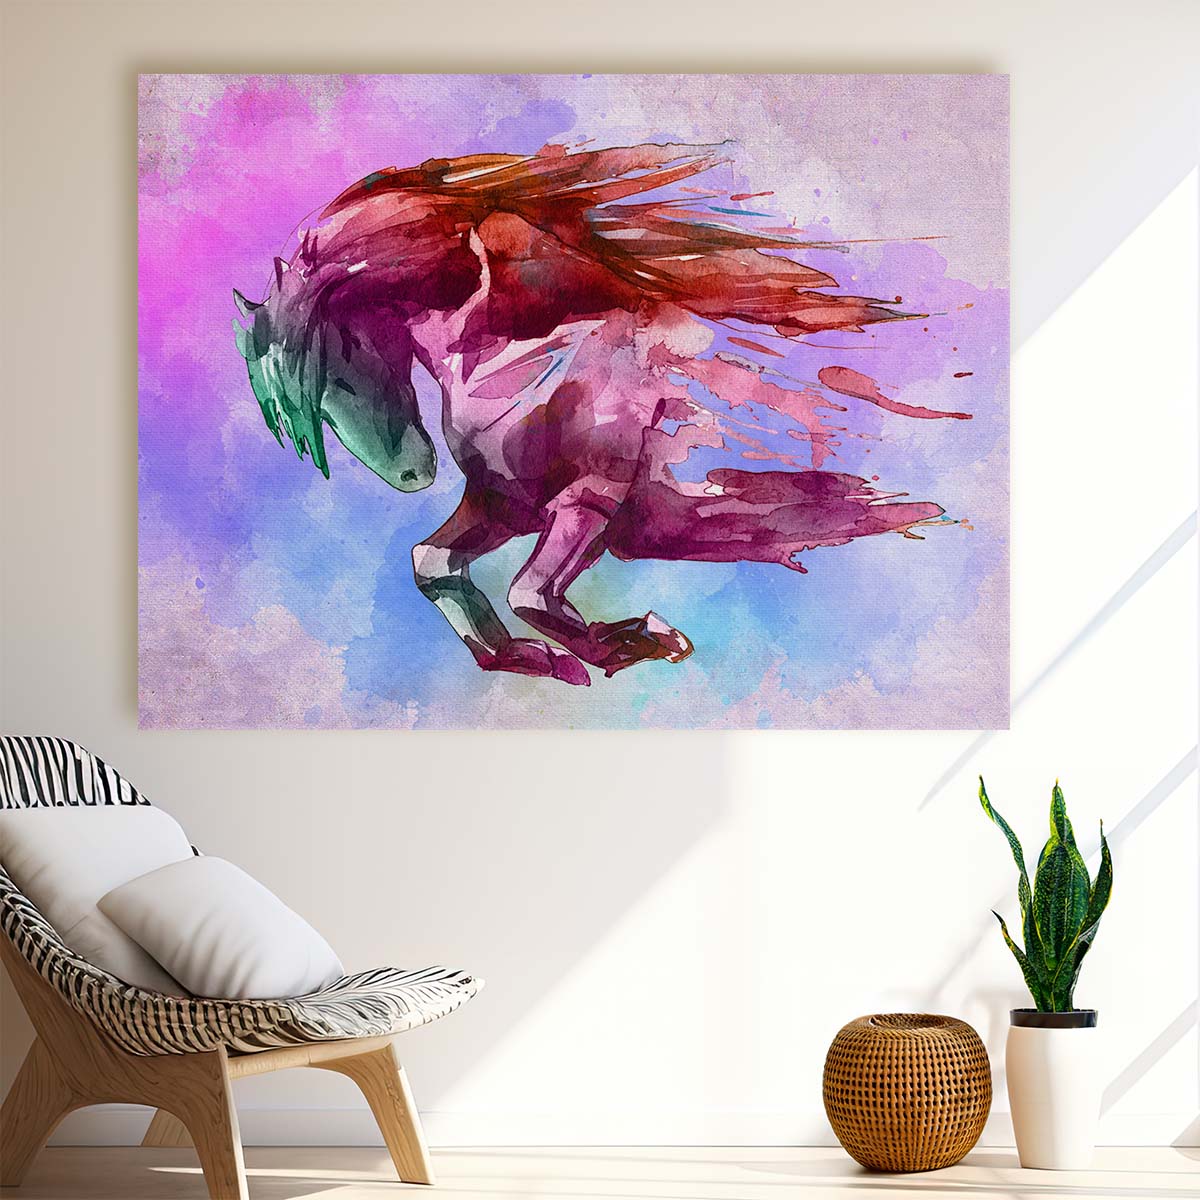 Red Horse Watercolor Painting Wall Art by Luxuriance Designs. Made in USA.